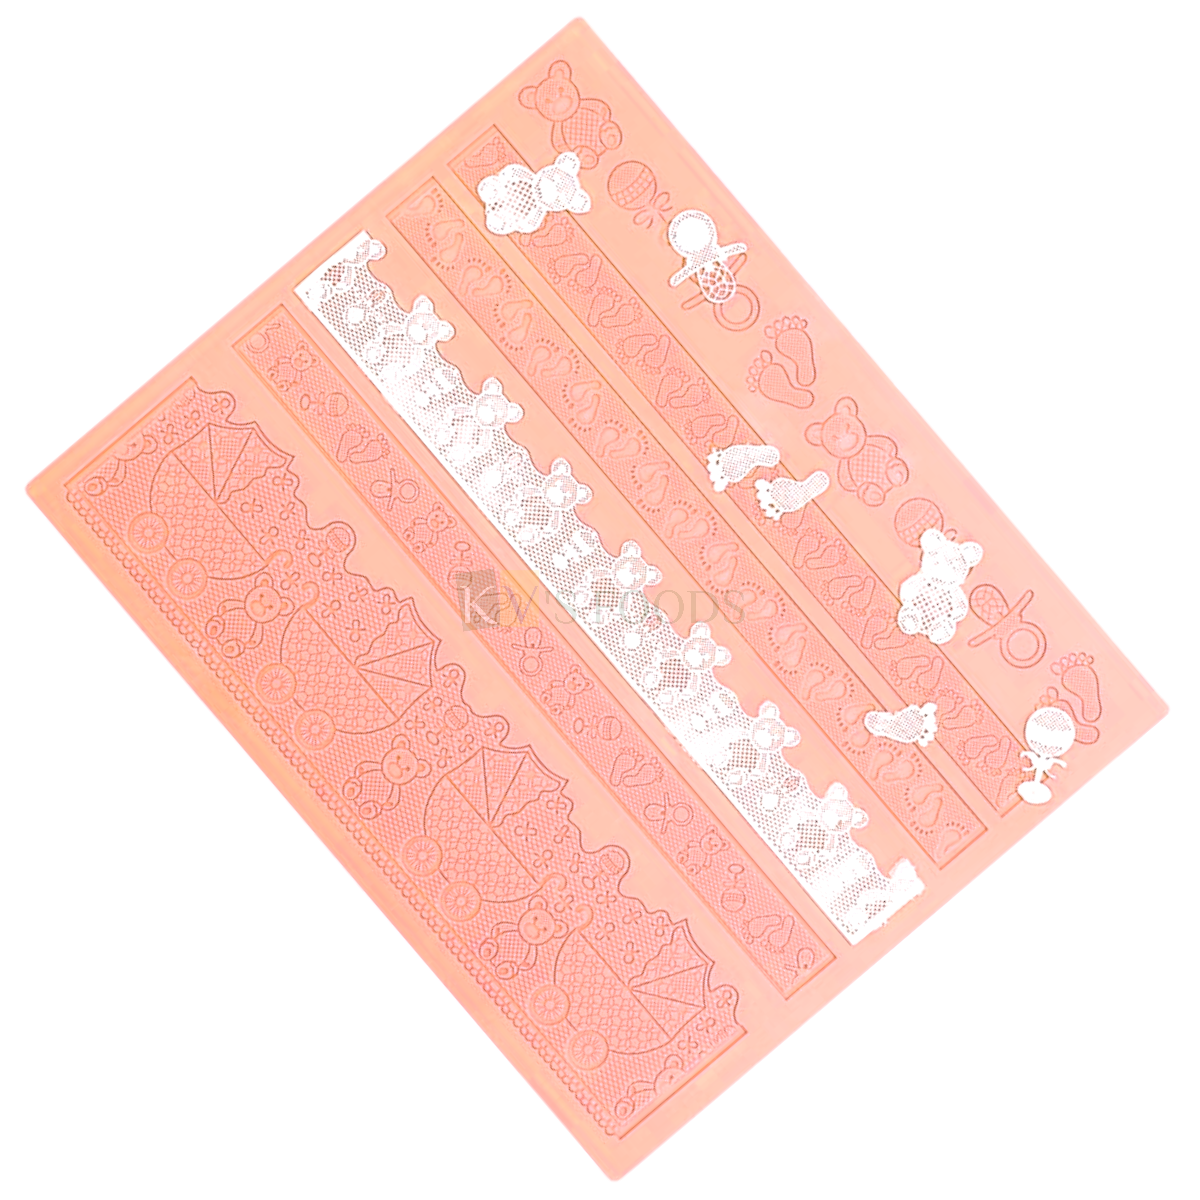 1 PC Peach Colour Silicone Lace Mat for Cake Border Theme Cake Mat Fondant Cake Decorating Mold Tools Sugar Lace Baking Mat DIY Embossing Pad for Baby Showers Cakes, Chocolate Lace DIY Cake Decoration